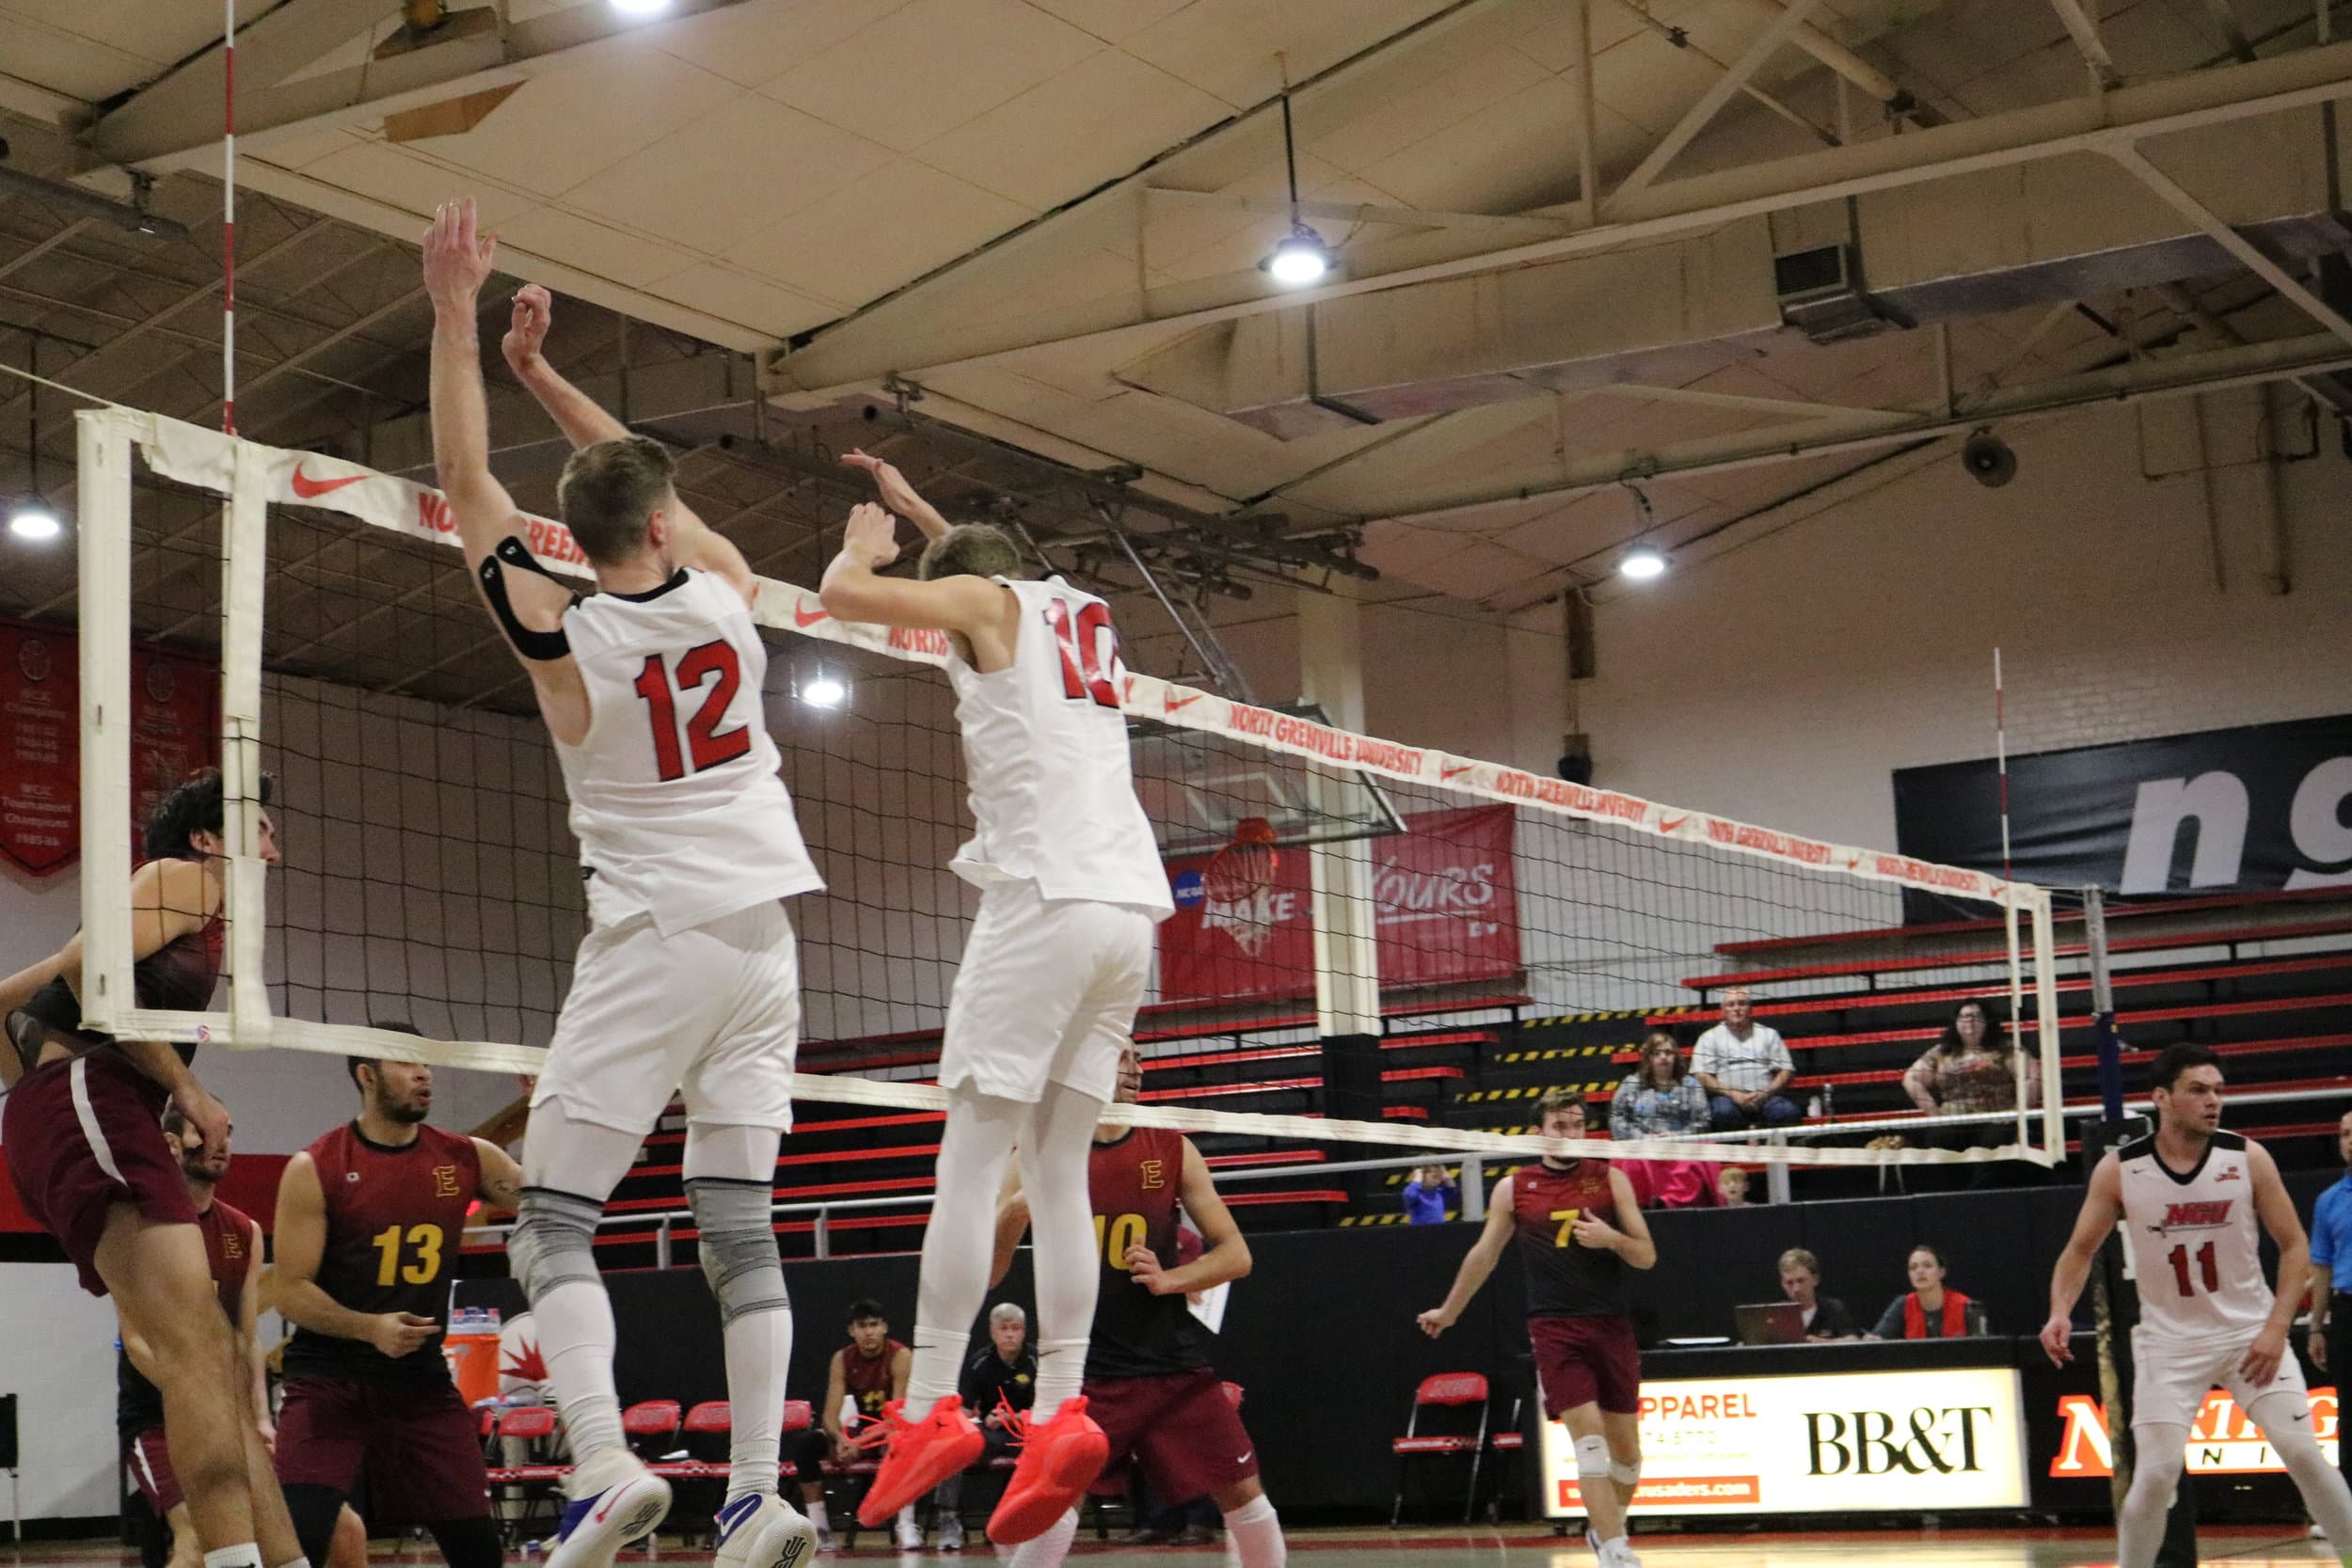 Baker (10) and Campbell (12) jump to block the ball being hit by the Lions during the third set.